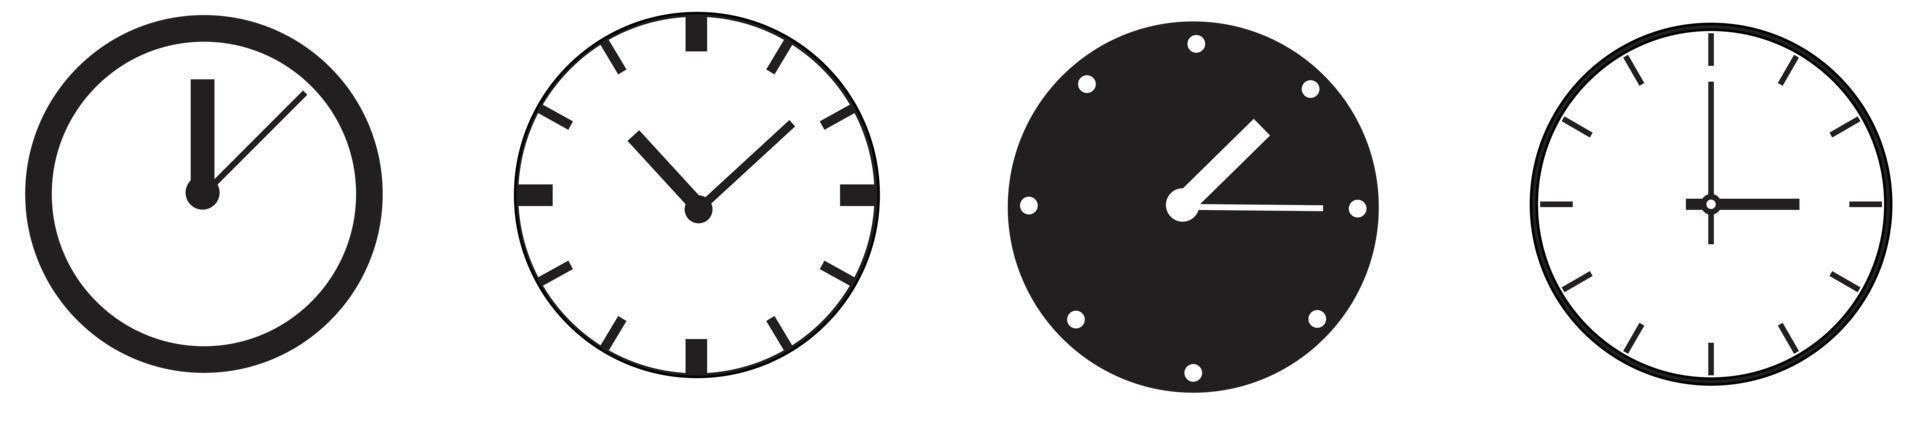 Time, Clock Vector Icons Set